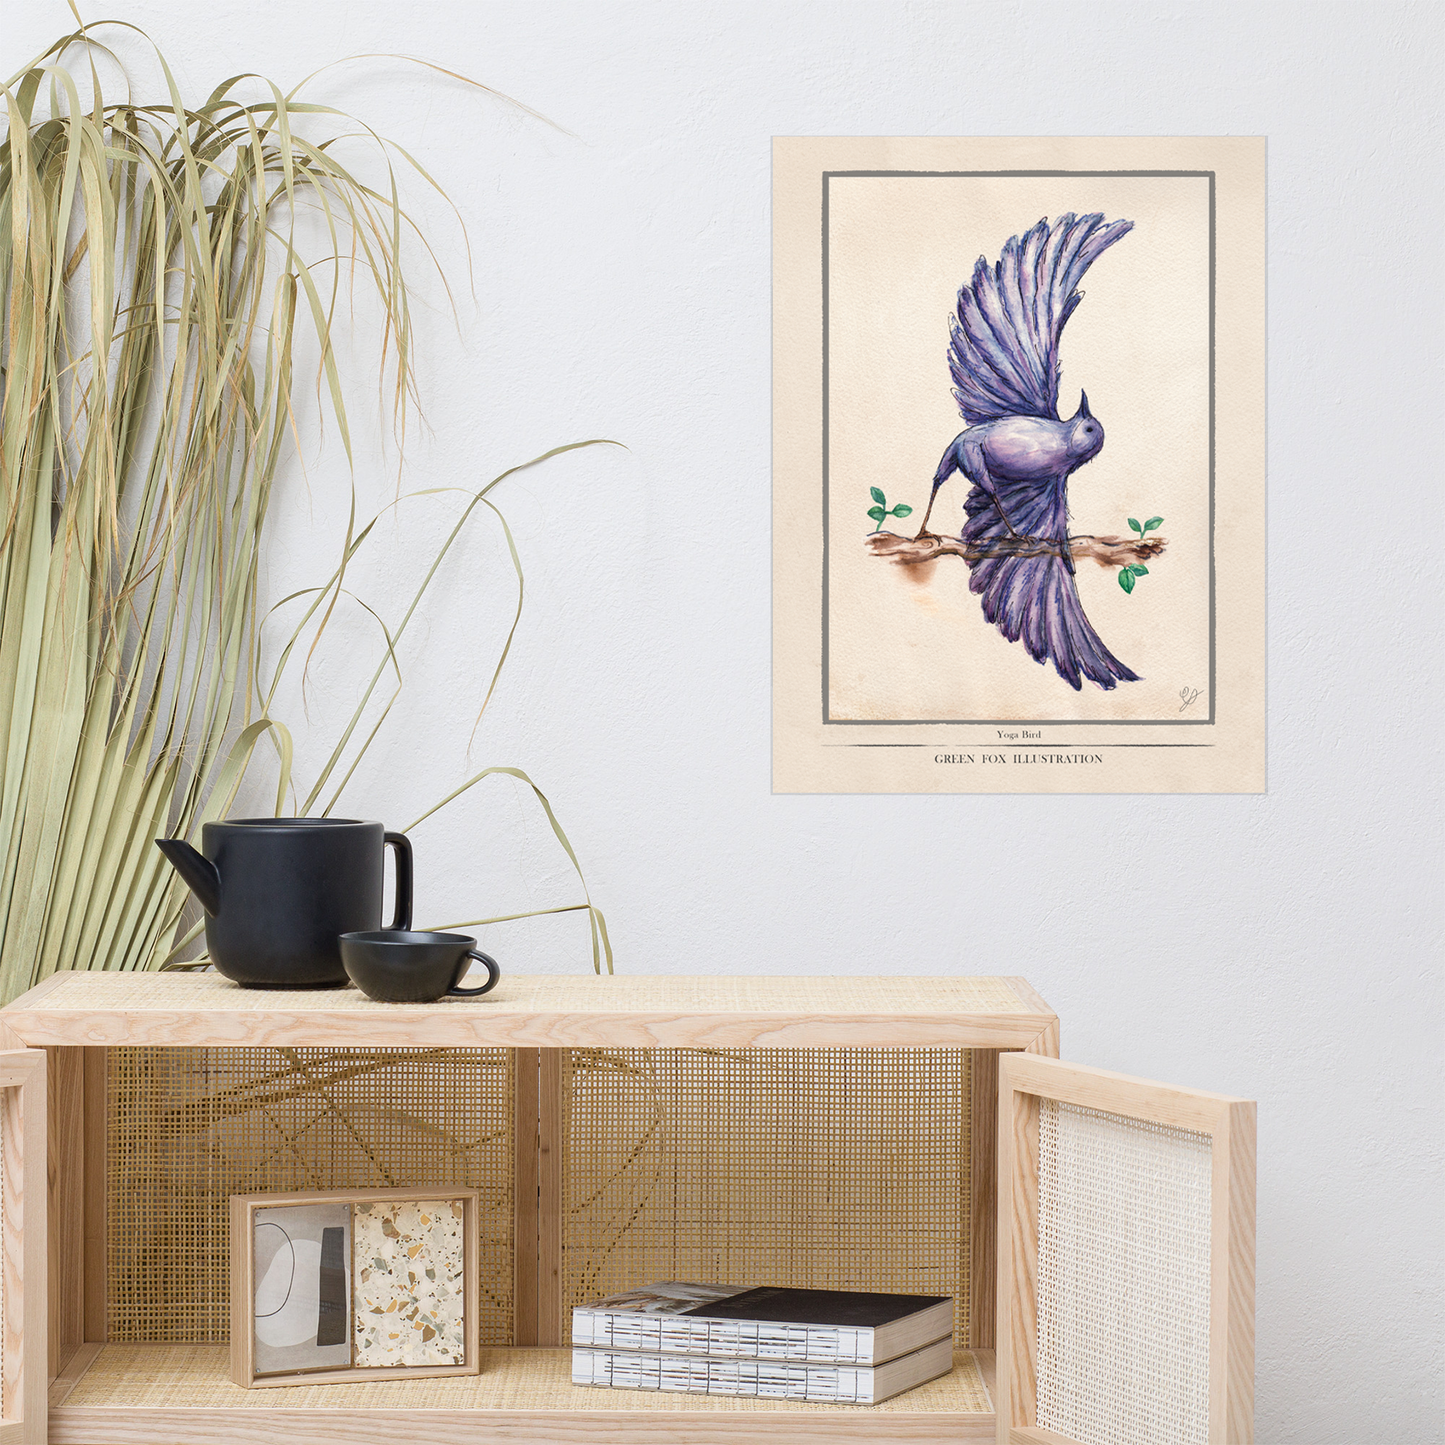 a poster up on the wall featuring a yoga bird illustration 